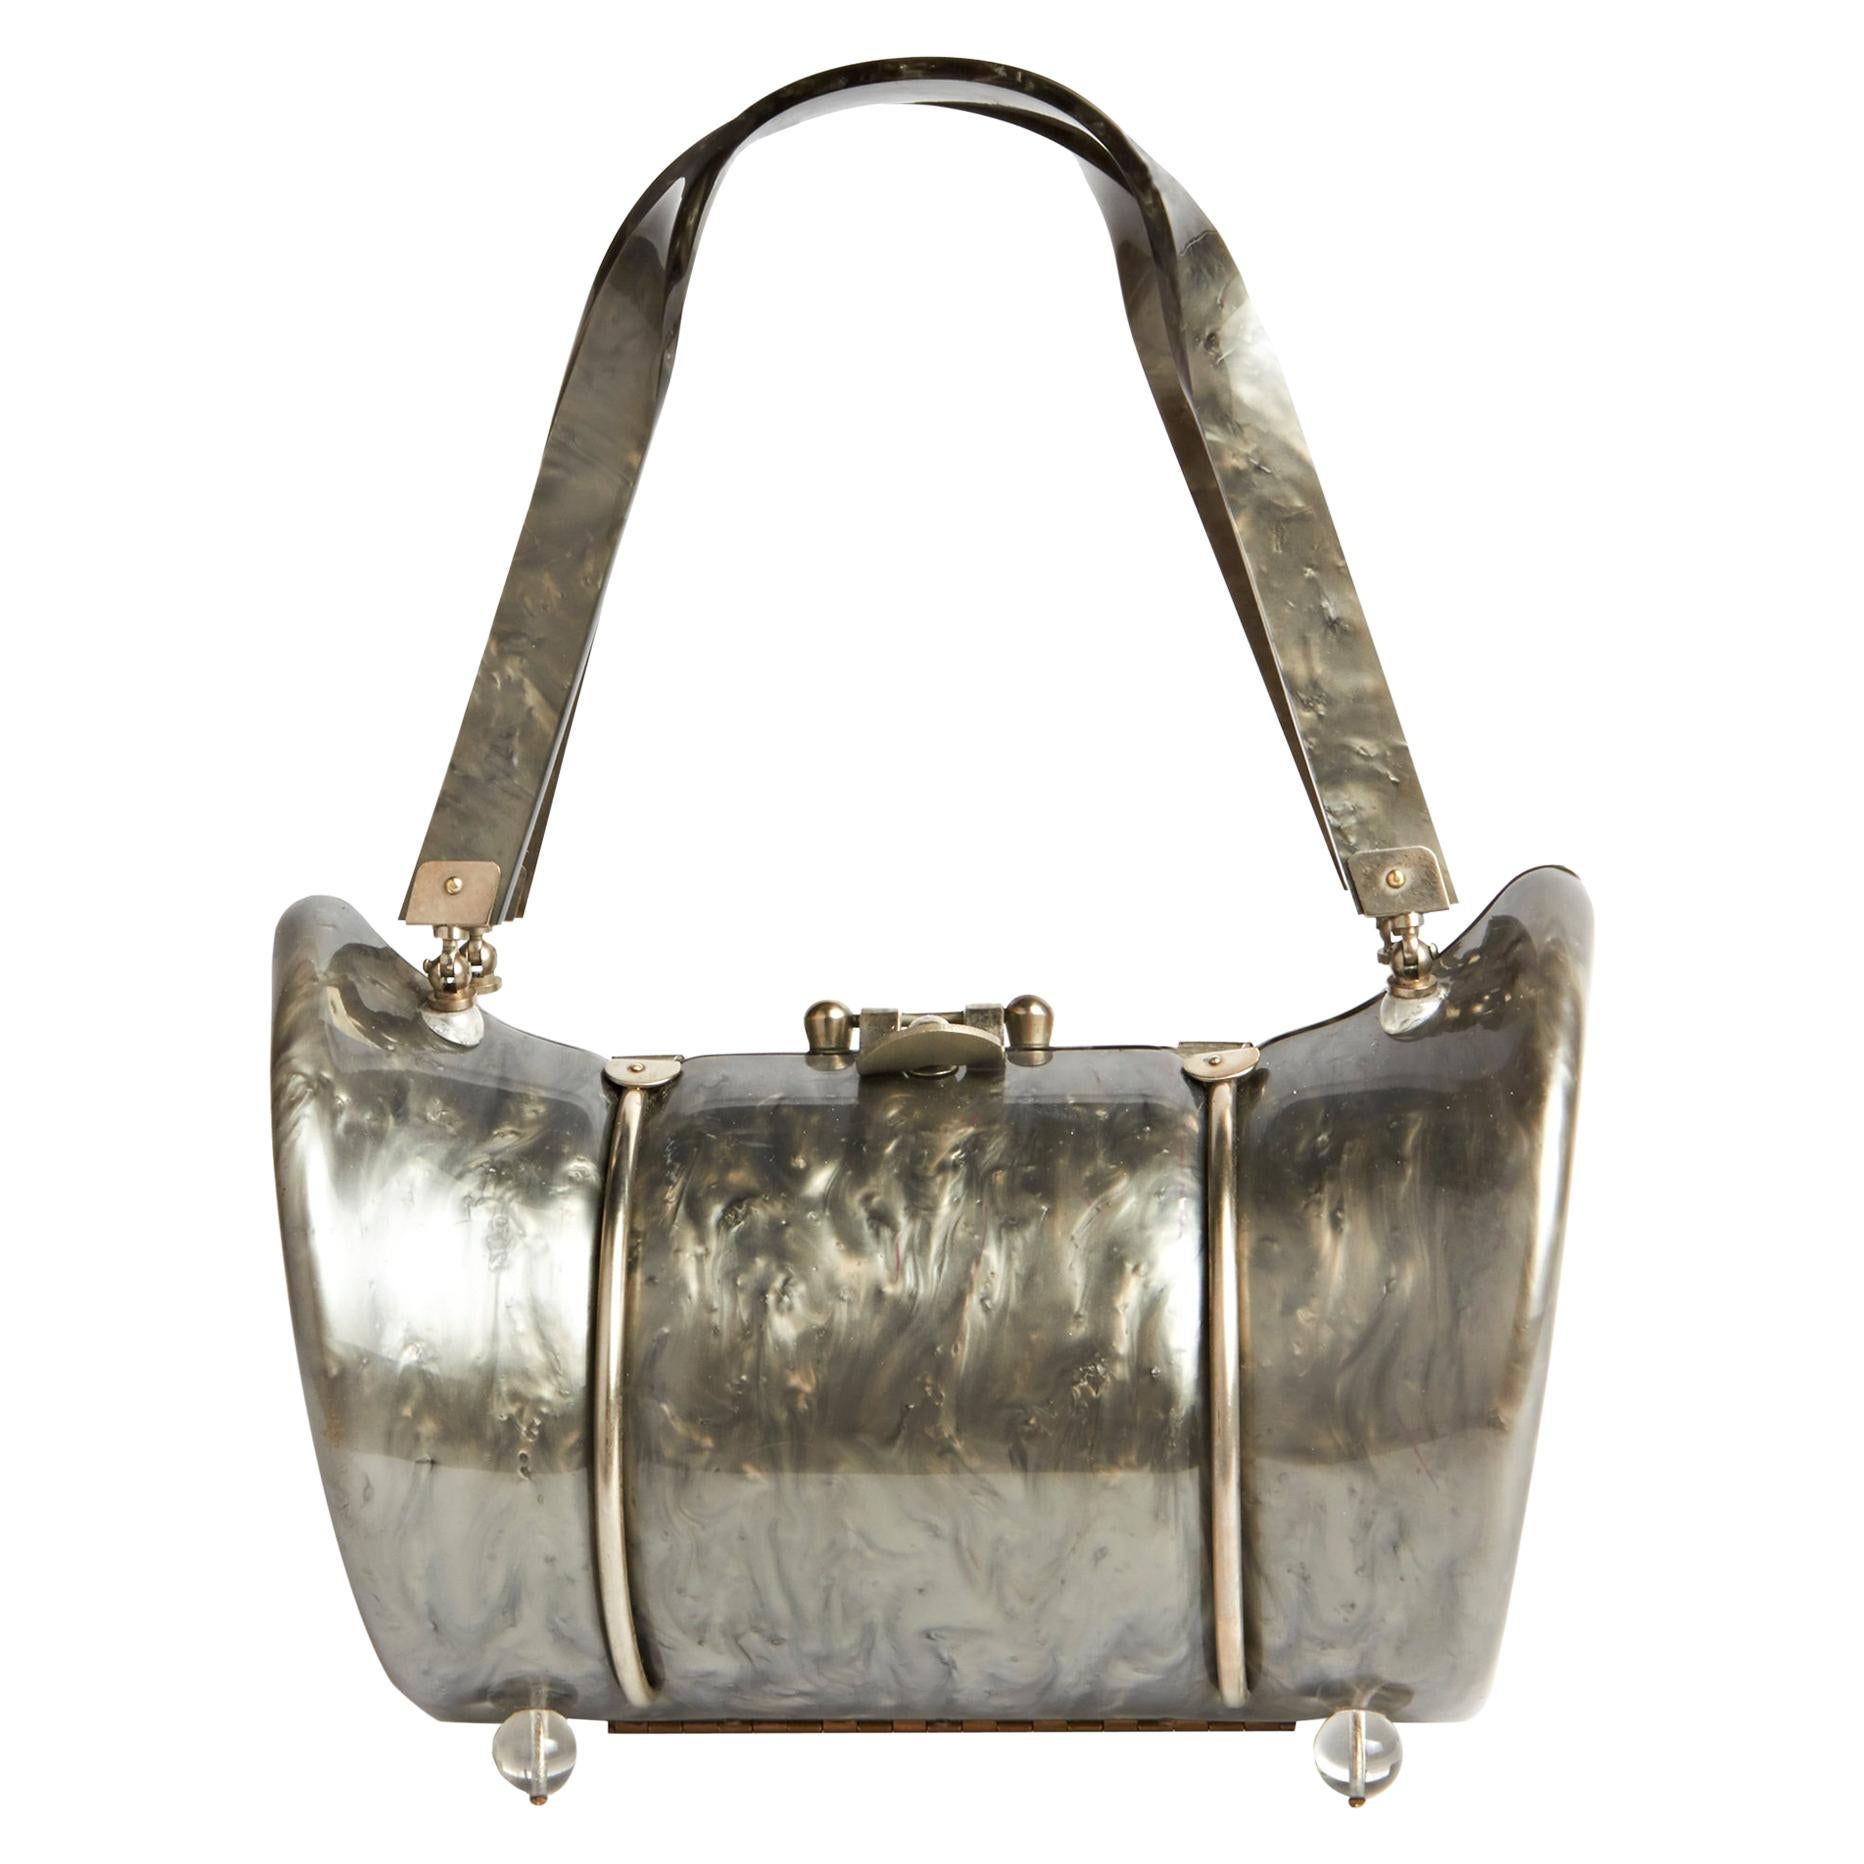 Rare American Mid-Century Pearlescent Gray Lucite Purse/Handbag by Llewellyn For Sale